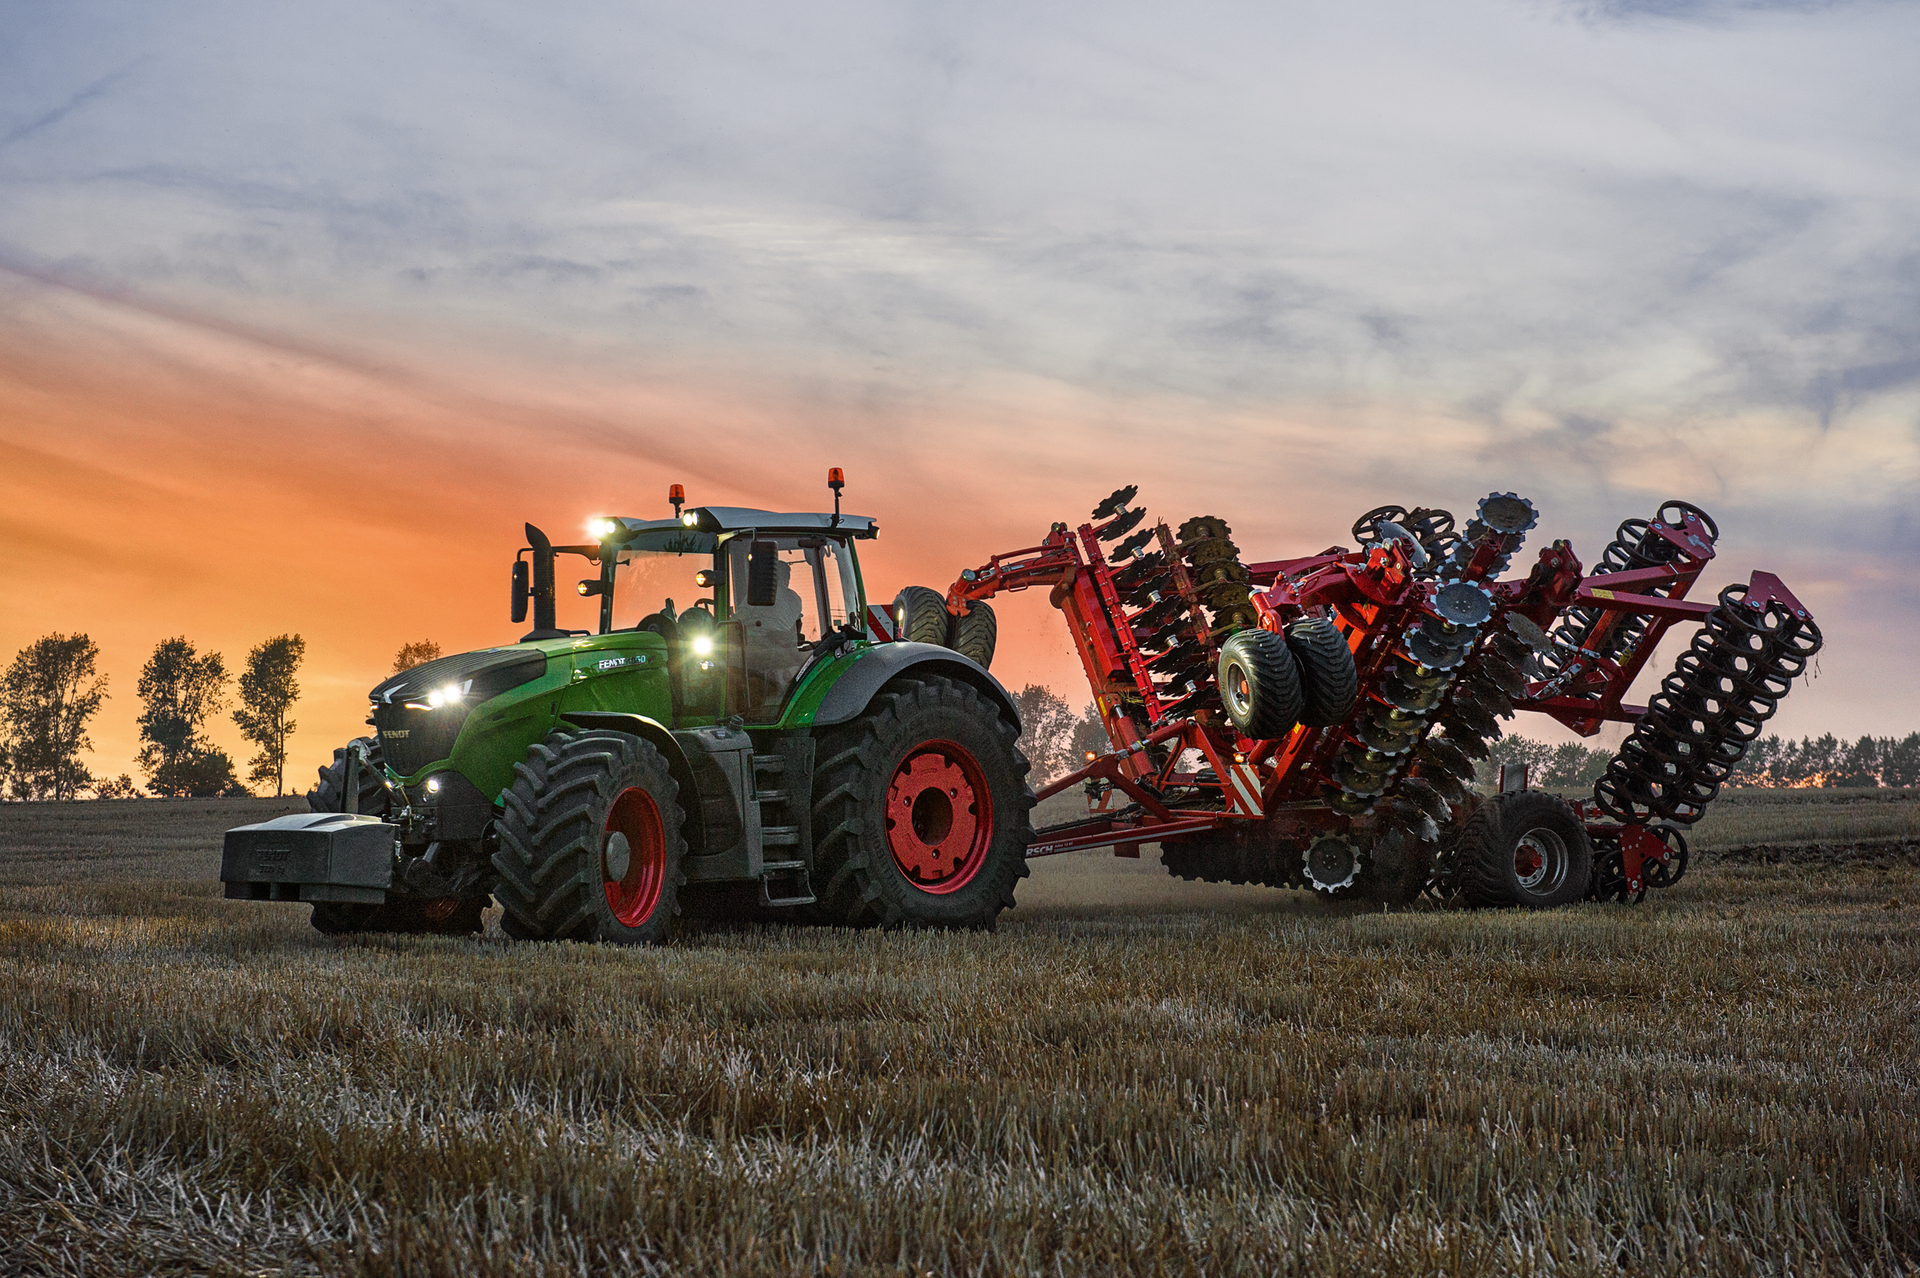 Fendt introduces new high-horsepower tractors with low engine speed concept  | OEM Off-Highway